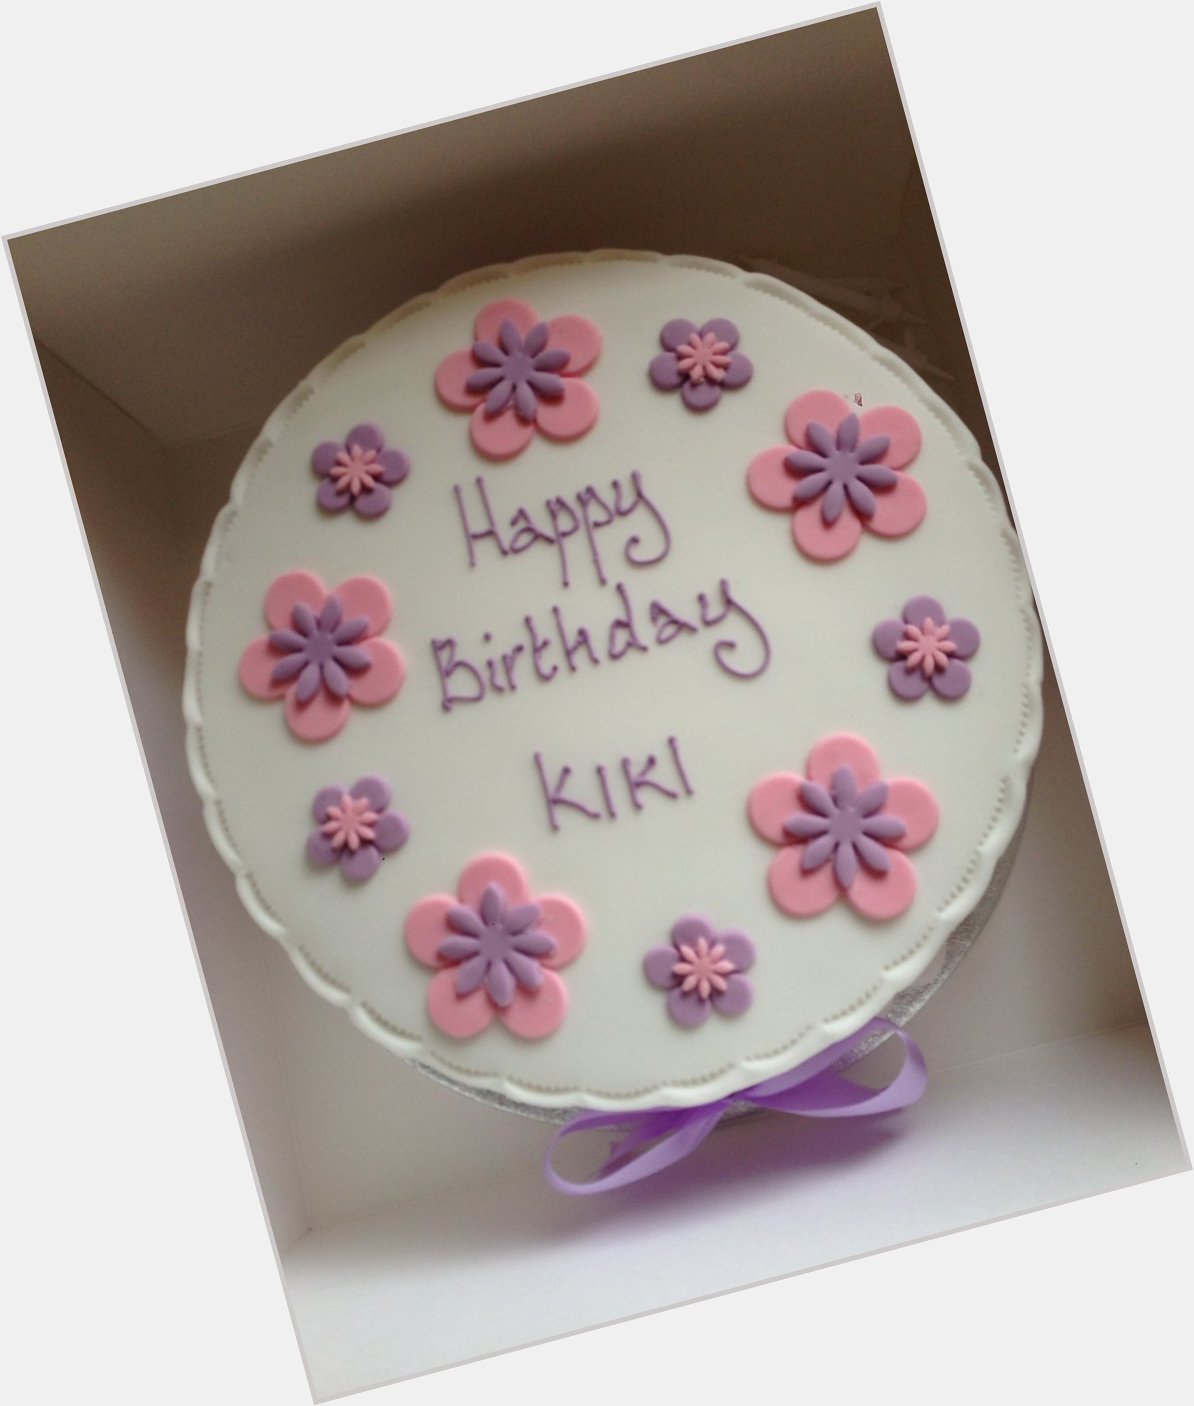 Happy Birthday Kiki Dee, Made in Yorkshire. Notton tonight, sellout house full! 